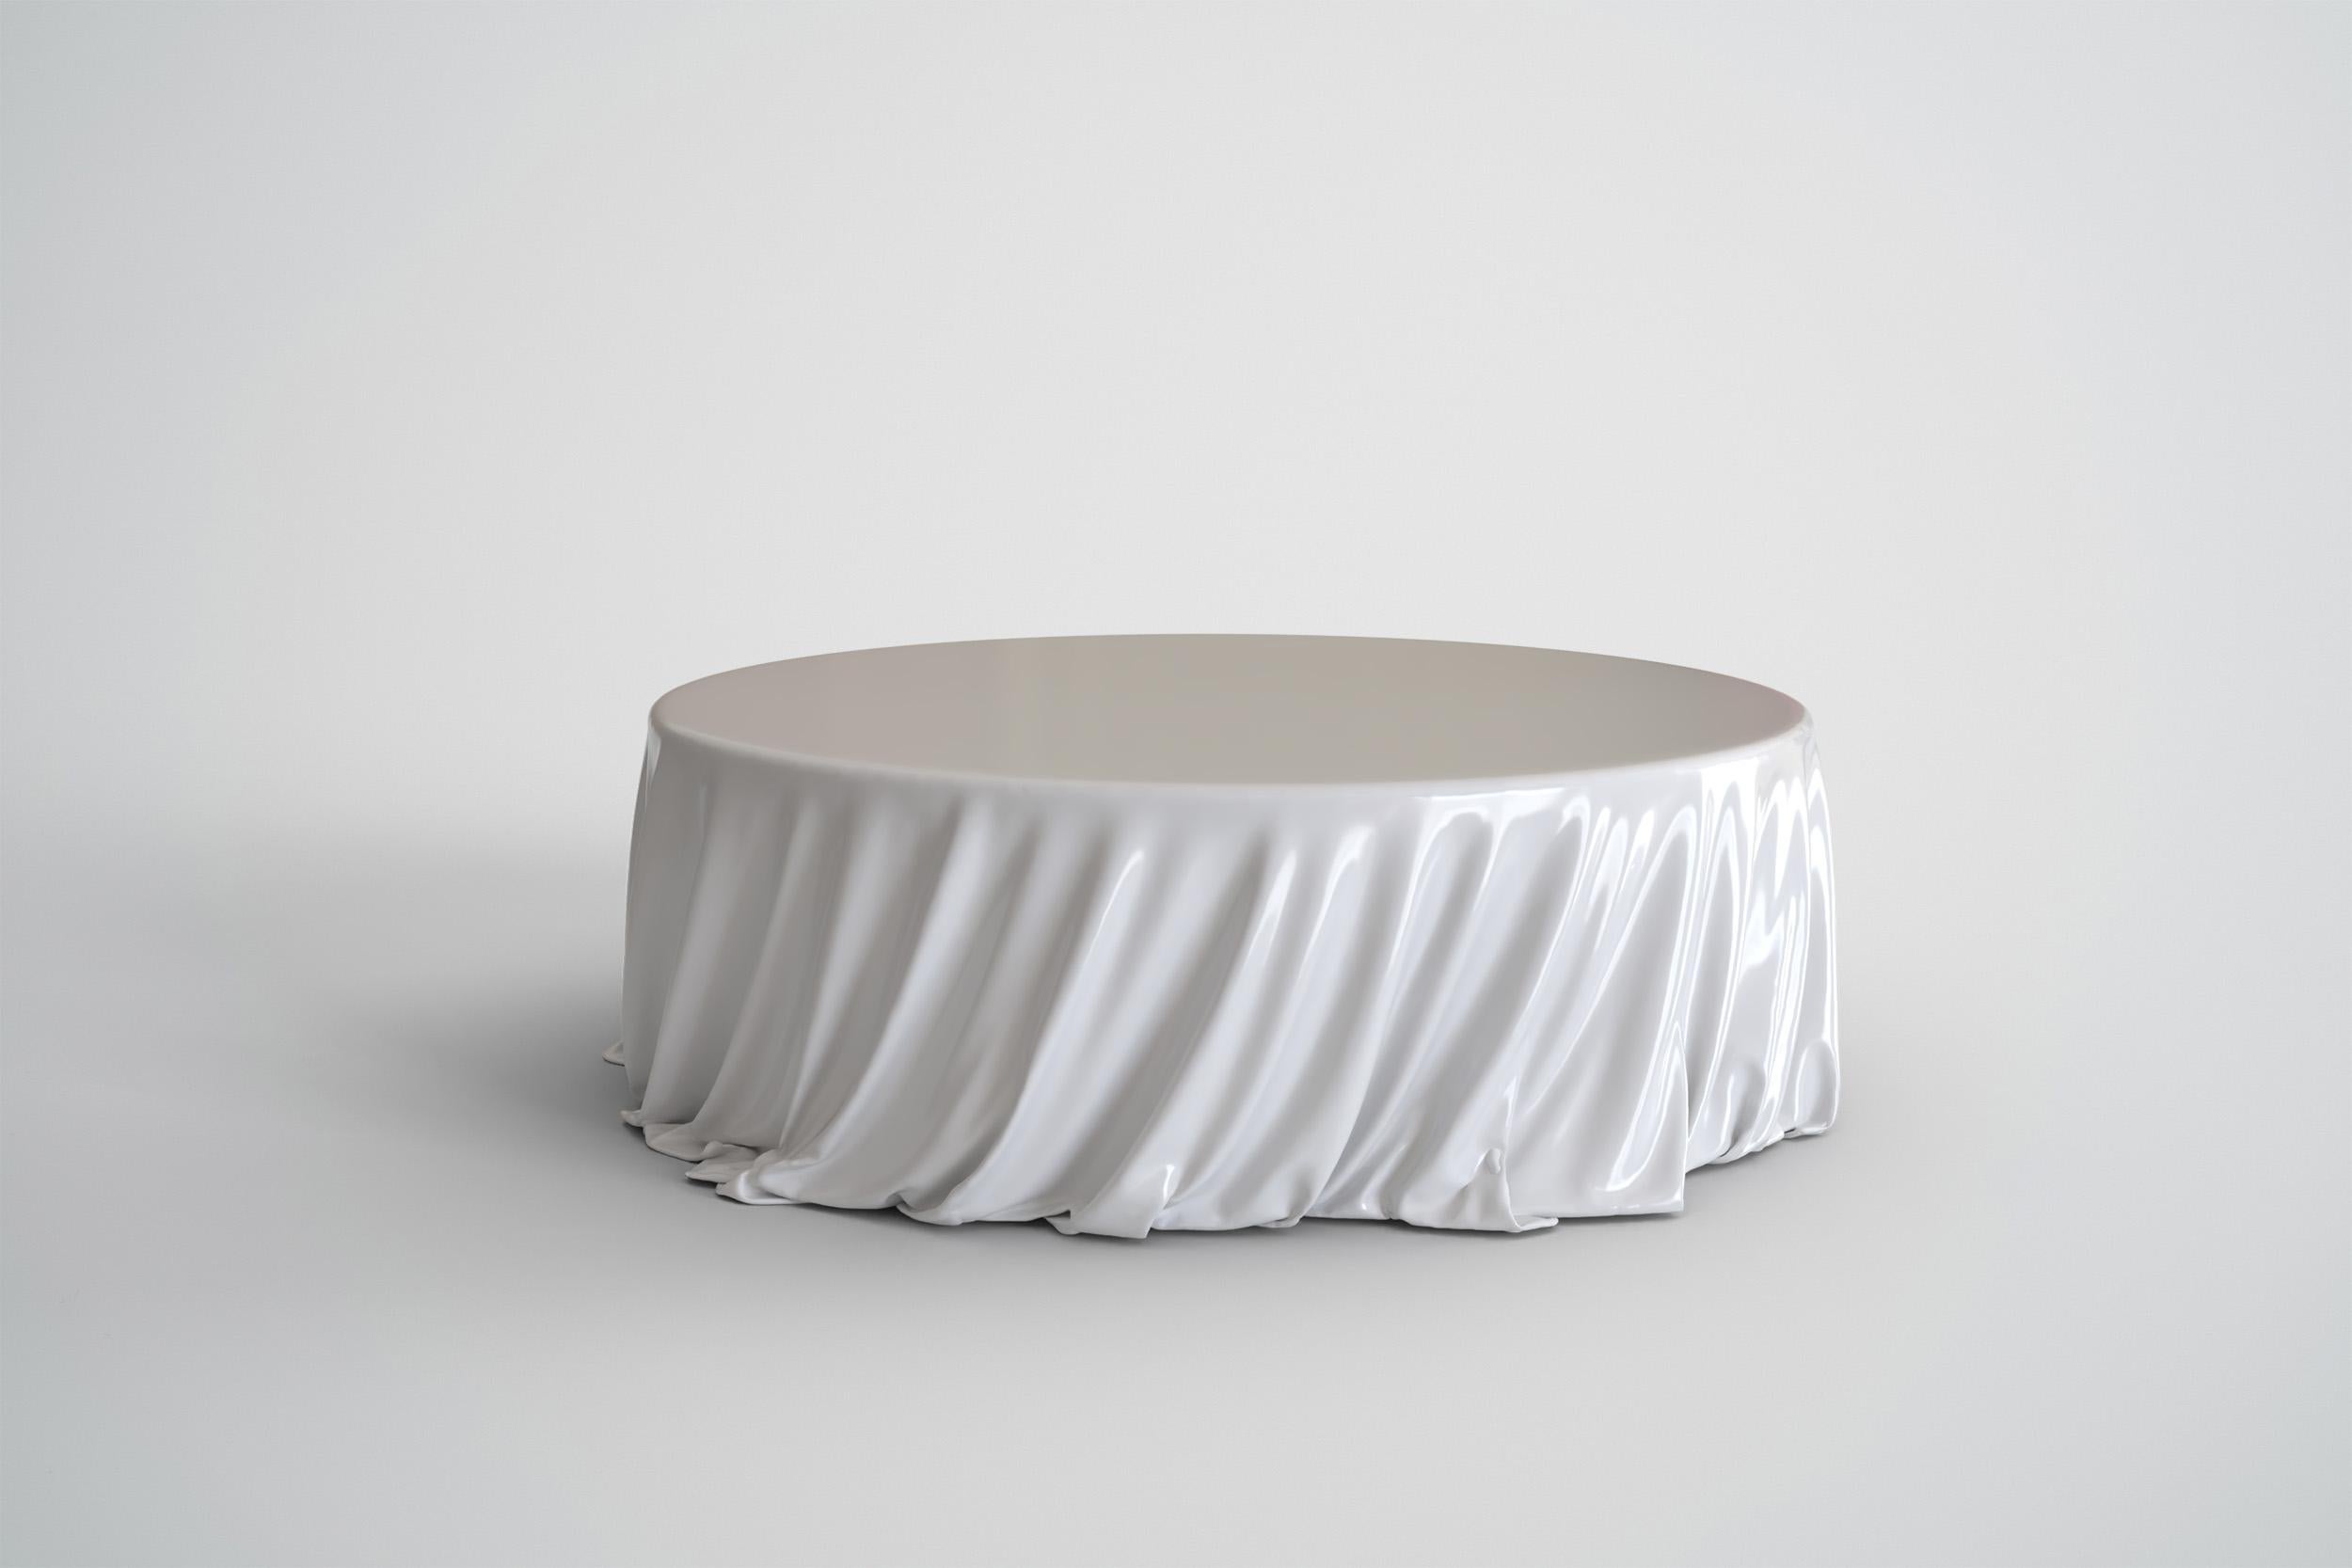 The Levitaz Round Coffee Table, finished in a White Gloss automotive finish, exemplifies modern sophistication with its elegant design and meticulous craftsmanship. This piece, sculpted from high-strength resin reinforced with carbon fiber, achieves